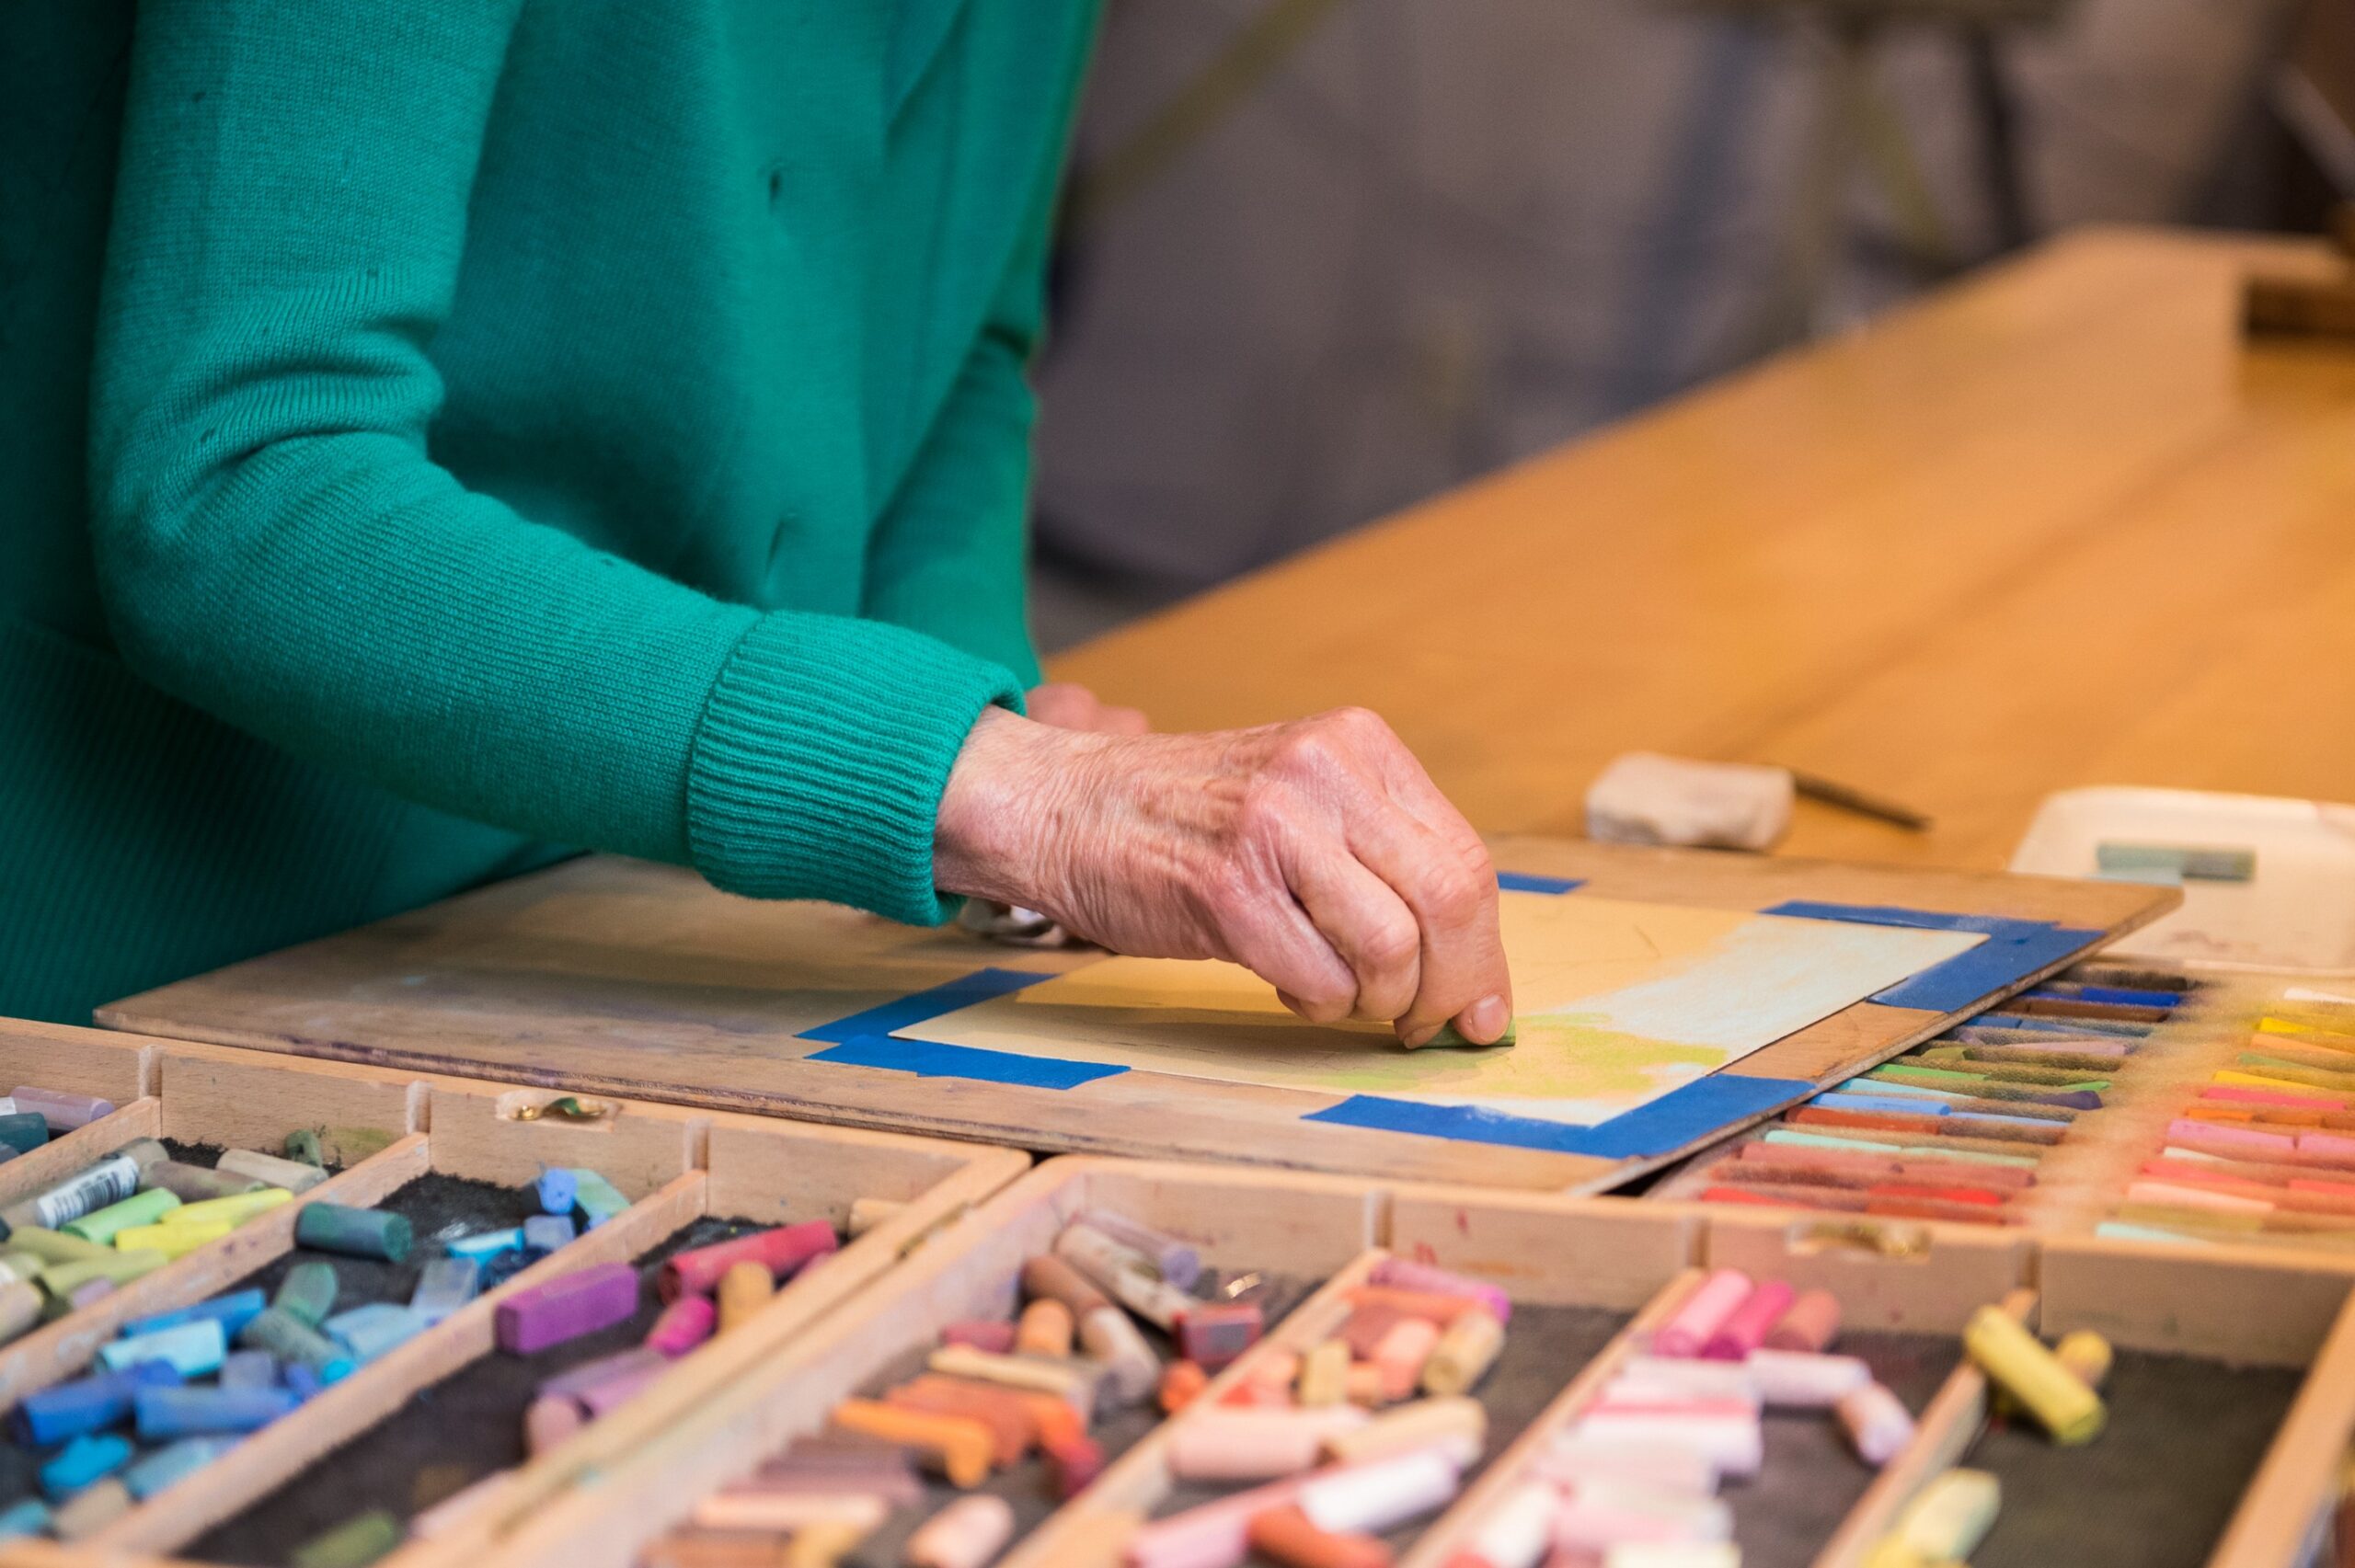 A woman in an independent living retirement community is working on a painting with colored crayons.